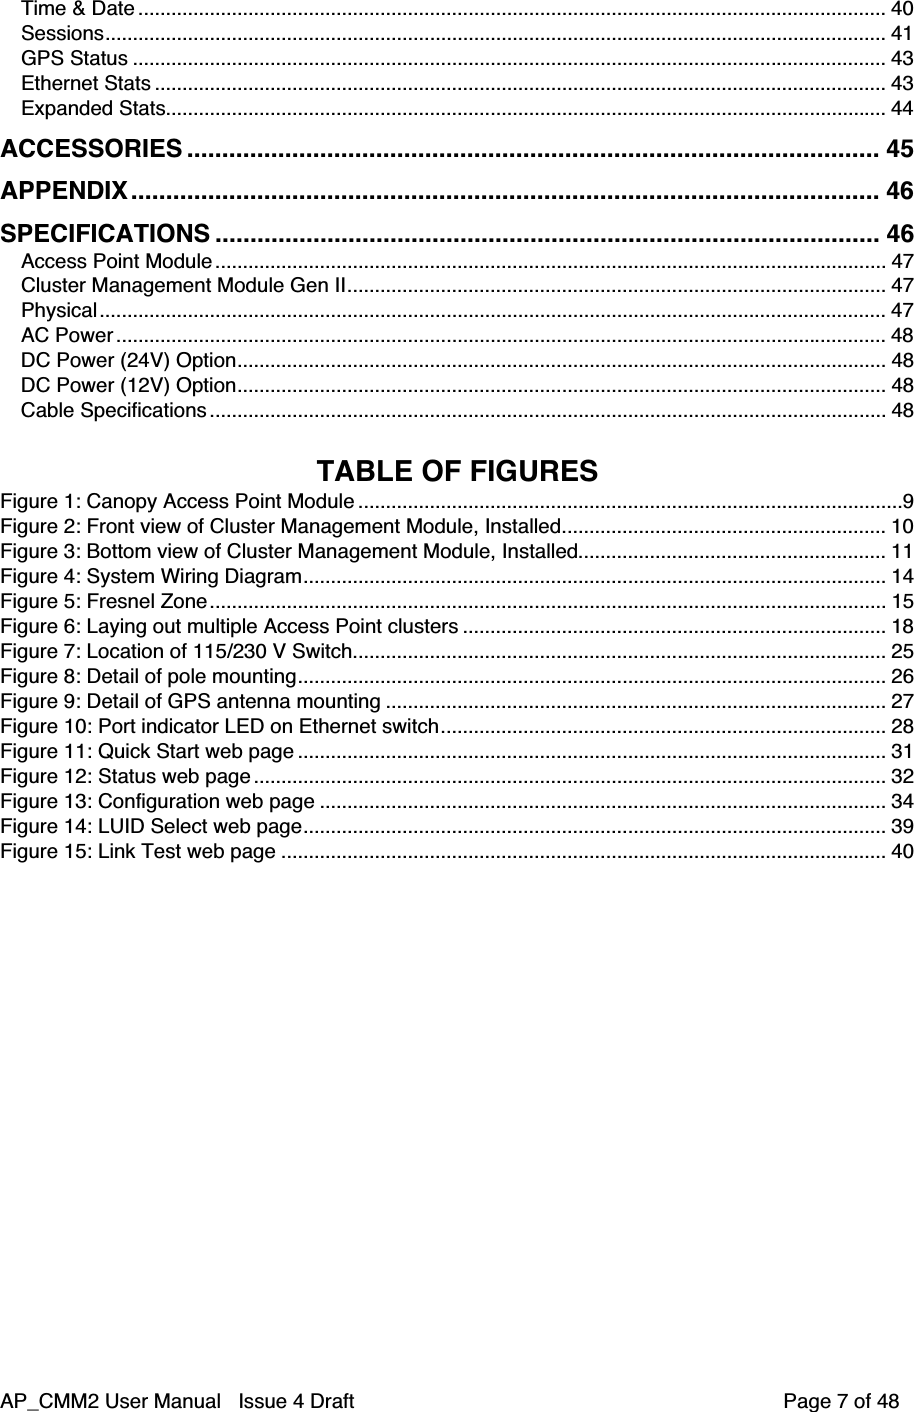 AP_CMM2 User Manual   Issue 4 Draft         Page 7 of 48Time &amp; Date ........................................................................................................................................ 40Sessions.............................................................................................................................................. 41GPS Status ......................................................................................................................................... 43Ethernet Stats ..................................................................................................................................... 43Expanded Stats................................................................................................................................... 44ACCESSORIES ................................................................................................... 45APPENDIX........................................................................................................... 46SPECIFICATIONS ............................................................................................... 46Access Point Module.......................................................................................................................... 47Cluster Management Module Gen II.................................................................................................. 47Physical ............................................................................................................................................... 47AC Power ............................................................................................................................................ 48DC Power (24V) Option...................................................................................................................... 48DC Power (12V) Option...................................................................................................................... 48Cable Specifications ........................................................................................................................... 48TABLE OF FIGURESFigure 1: Canopy Access Point Module ...................................................................................................9Figure 2: Front view of Cluster Management Module, Installed........................................................... 10Figure 3: Bottom view of Cluster Management Module, Installed........................................................ 11Figure 4: System Wiring Diagram.......................................................................................................... 14Figure 5: Fresnel Zone........................................................................................................................... 15Figure 6: Laying out multiple Access Point clusters ............................................................................. 18Figure 7: Location of 115/230 V Switch................................................................................................. 25Figure 8: Detail of pole mounting........................................................................................................... 26Figure 9: Detail of GPS antenna mounting ........................................................................................... 27Figure 10: Port indicator LED on Ethernet switch................................................................................. 28Figure 11: Quick Start web page ........................................................................................................... 31Figure 12: Status web page ................................................................................................................... 32Figure 13: Configuration web page ....................................................................................................... 34Figure 14: LUID Select web page.......................................................................................................... 39Figure 15: Link Test web page .............................................................................................................. 40